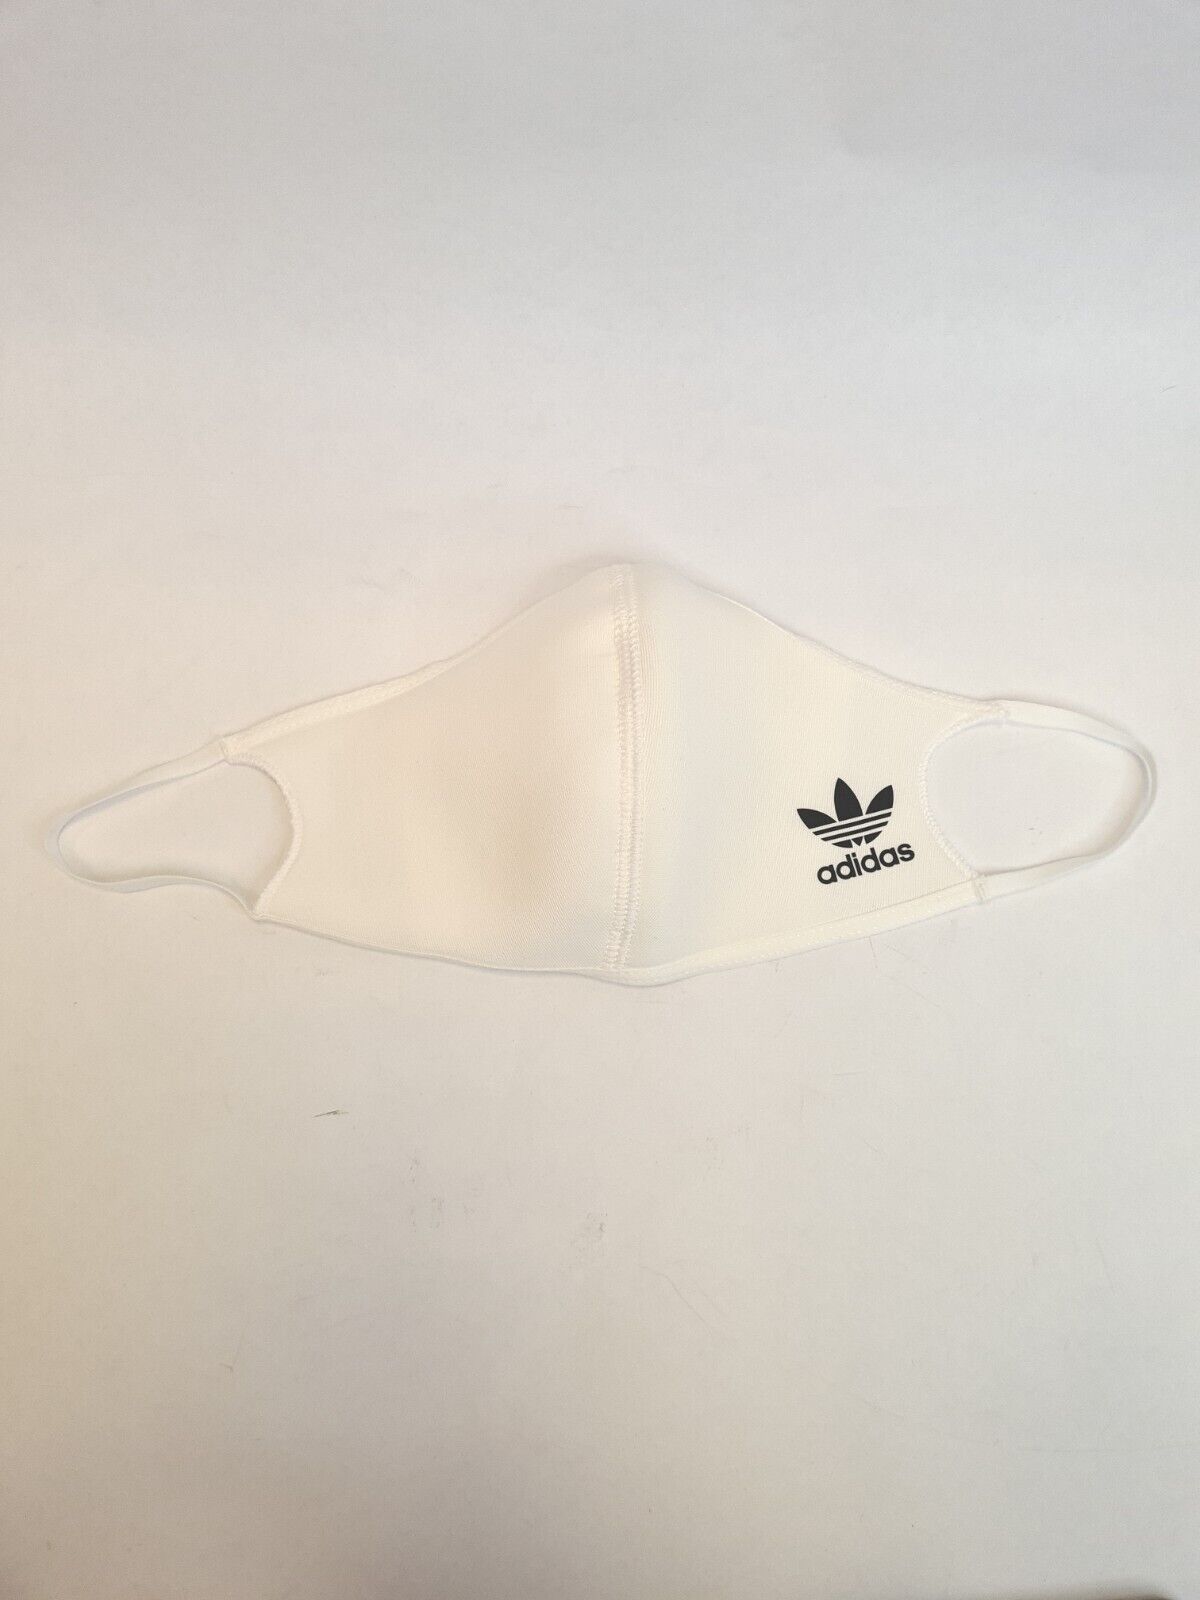 Adidas Originals 3 pack face coverings in white M/L **** VJ1